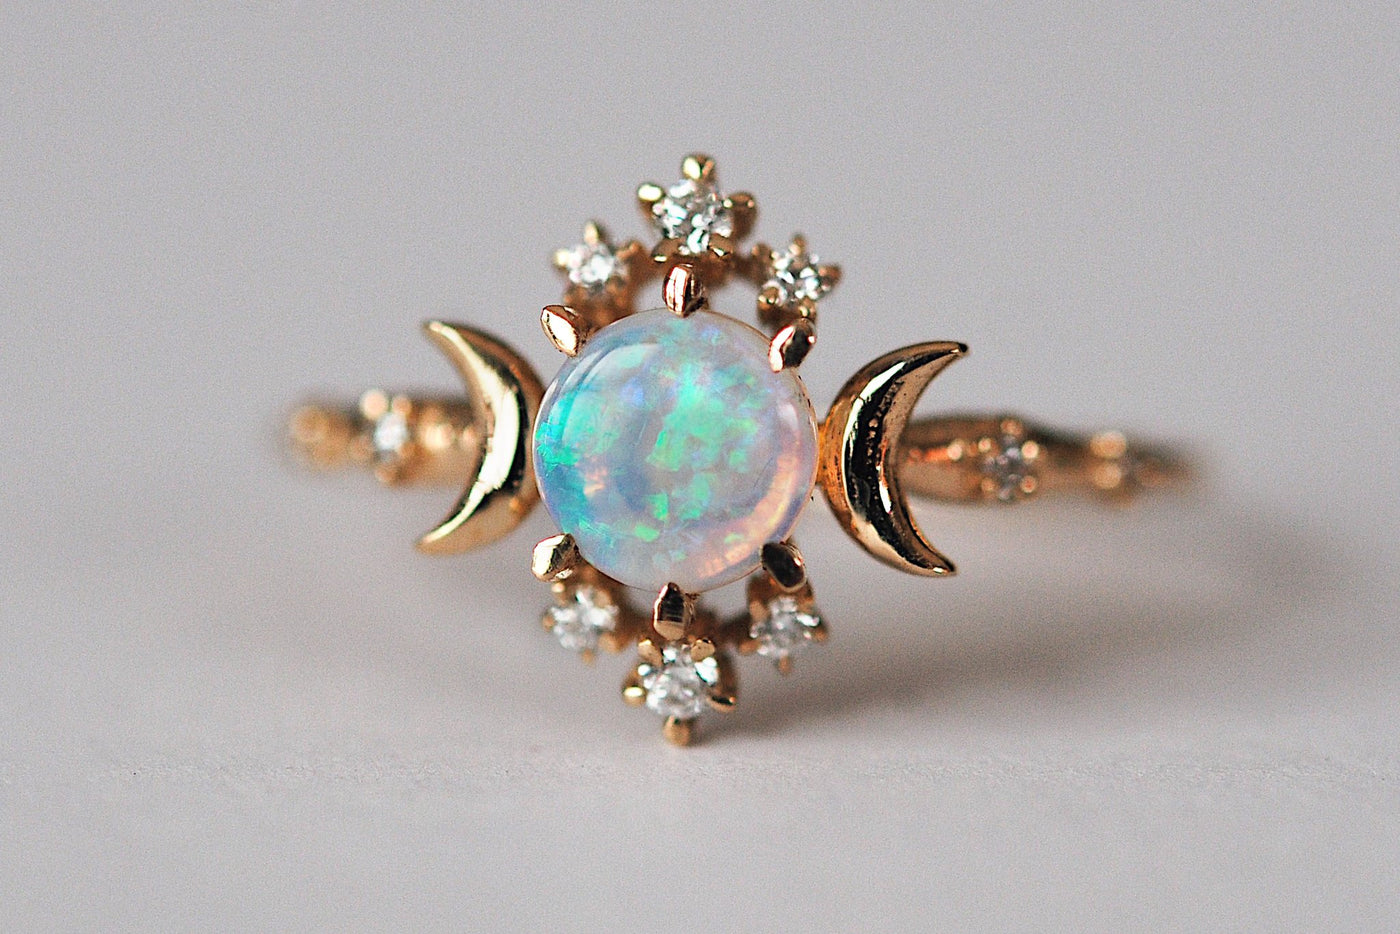 Opals and How to Care for Opals